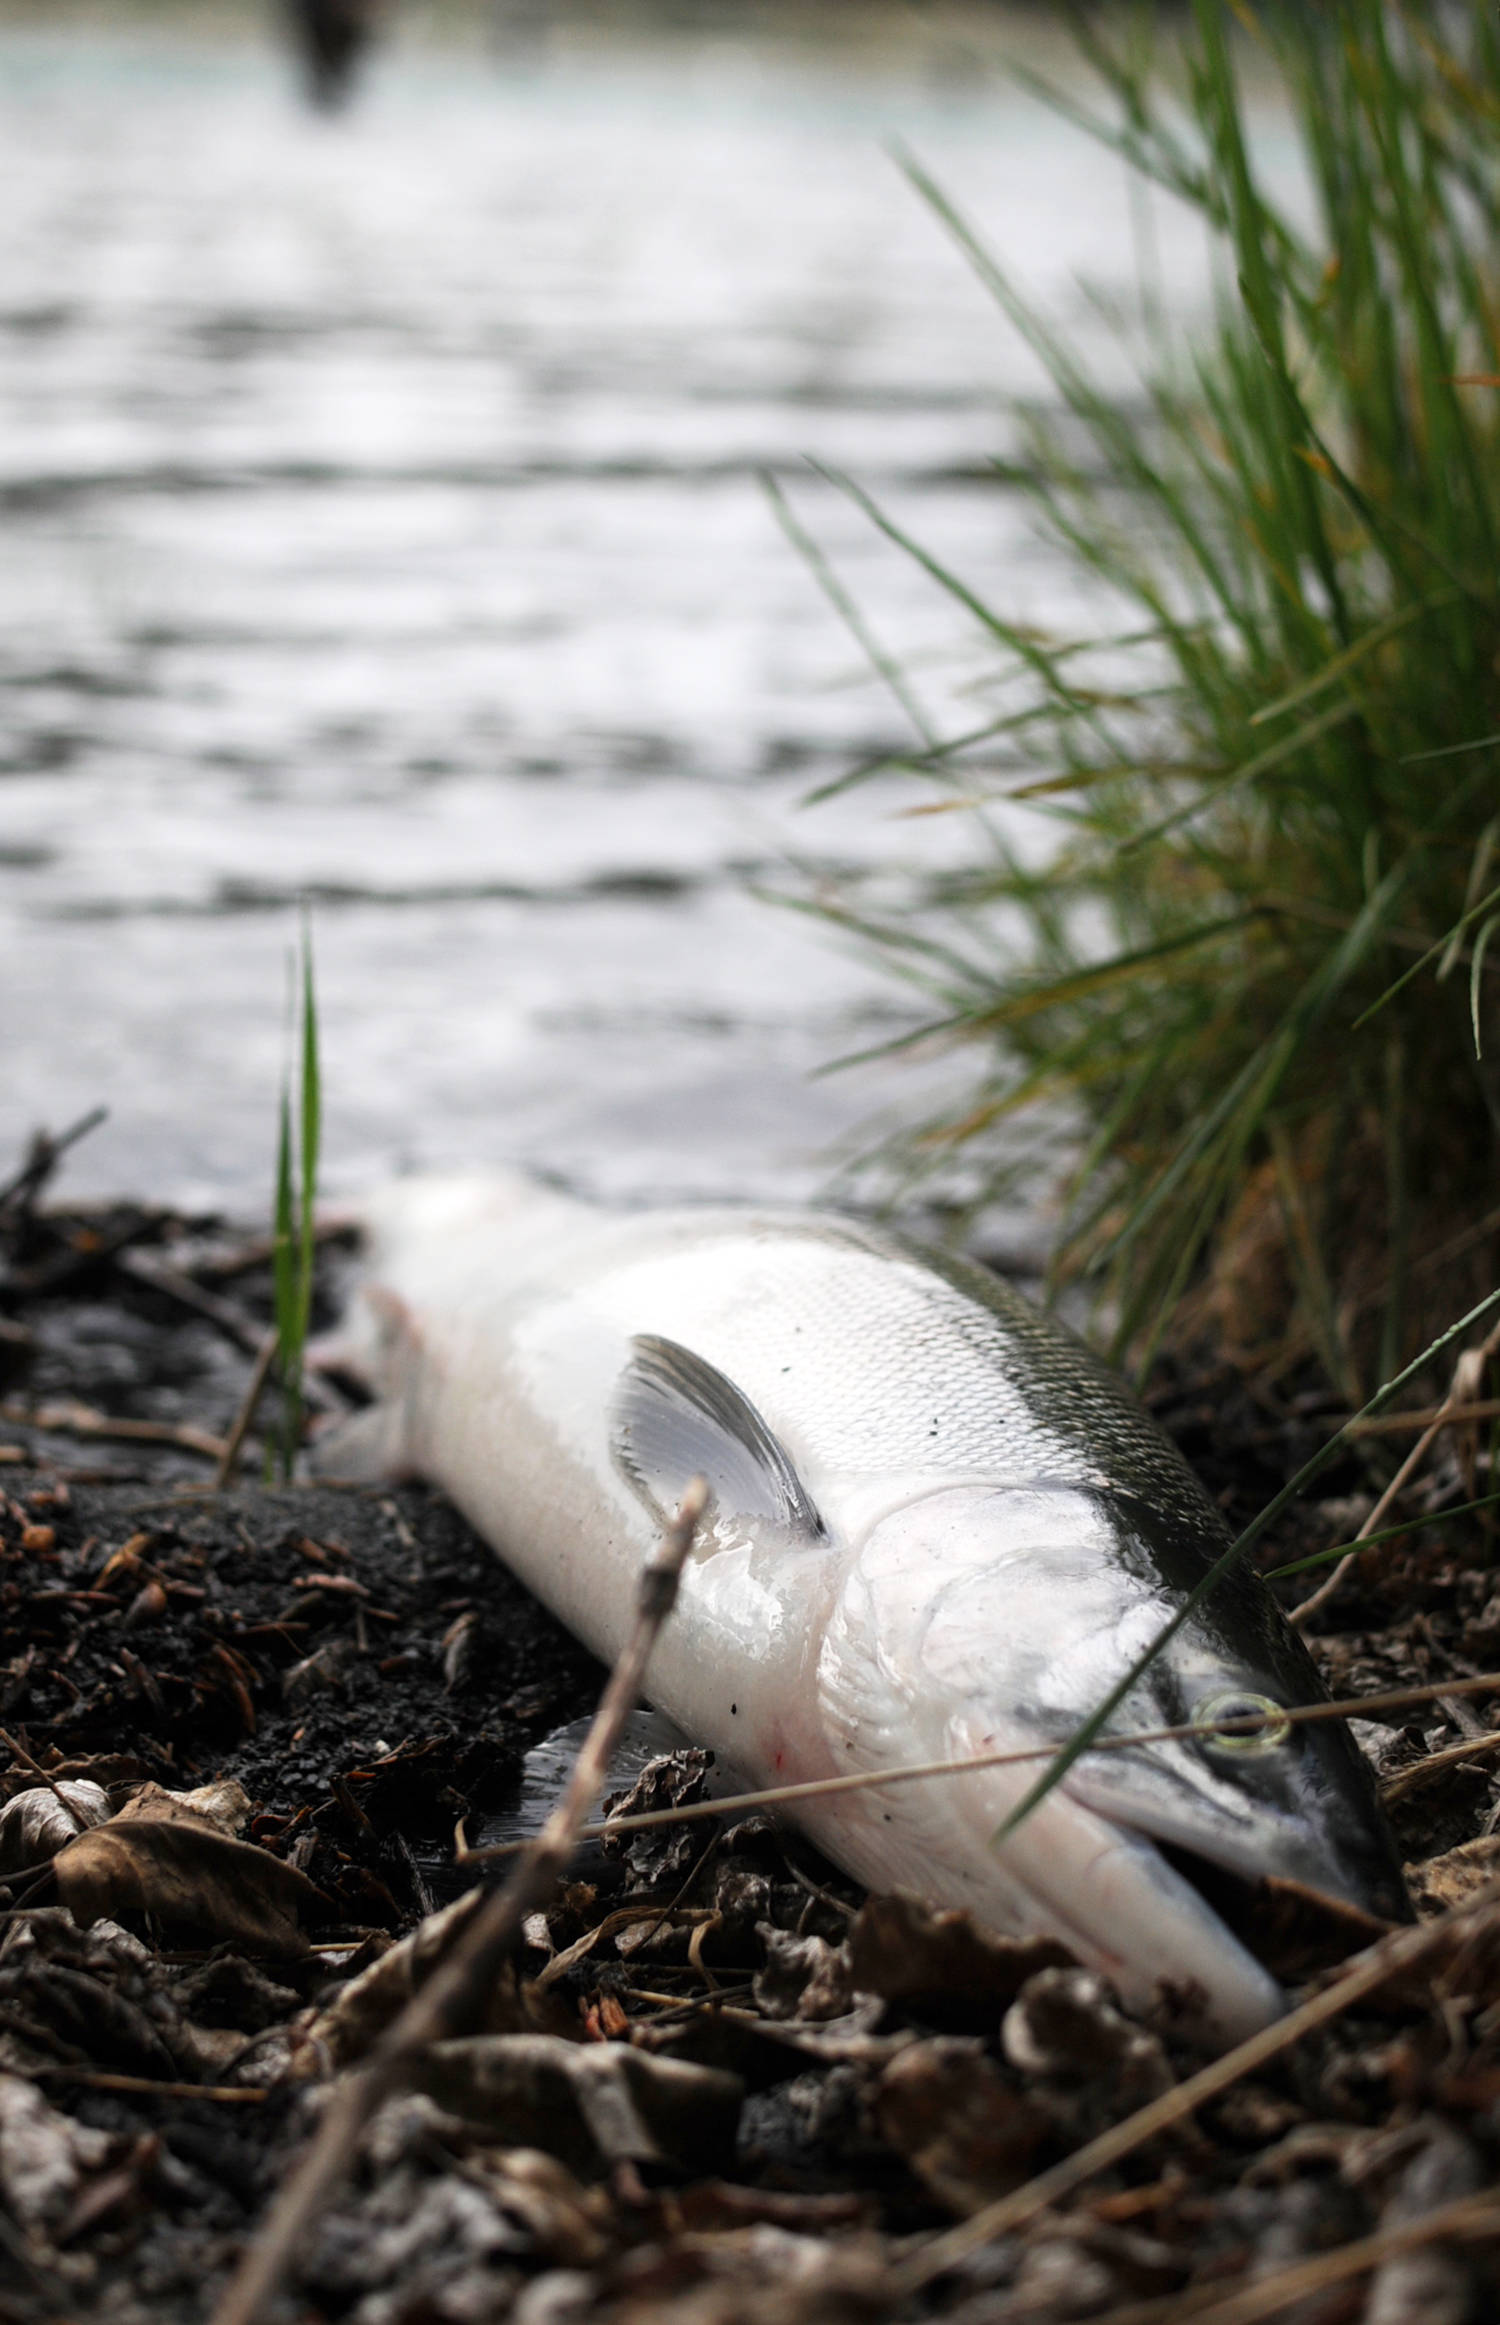 A sockeye salmon hooked by a lucky angler rests on the bank of the Kenai River downstream of the confluence with the Russian River on Sunday, June 11, 2017 near Cooper Landing, Alaska. Sunday was the first opening for the popular Russian River sockeye salmon sportfishery, and by midmorning, many anglers were already packing out their limits of salmon while others pulled in their catches. (Photo by Elizabeth Earl/Peninsula Clarion)